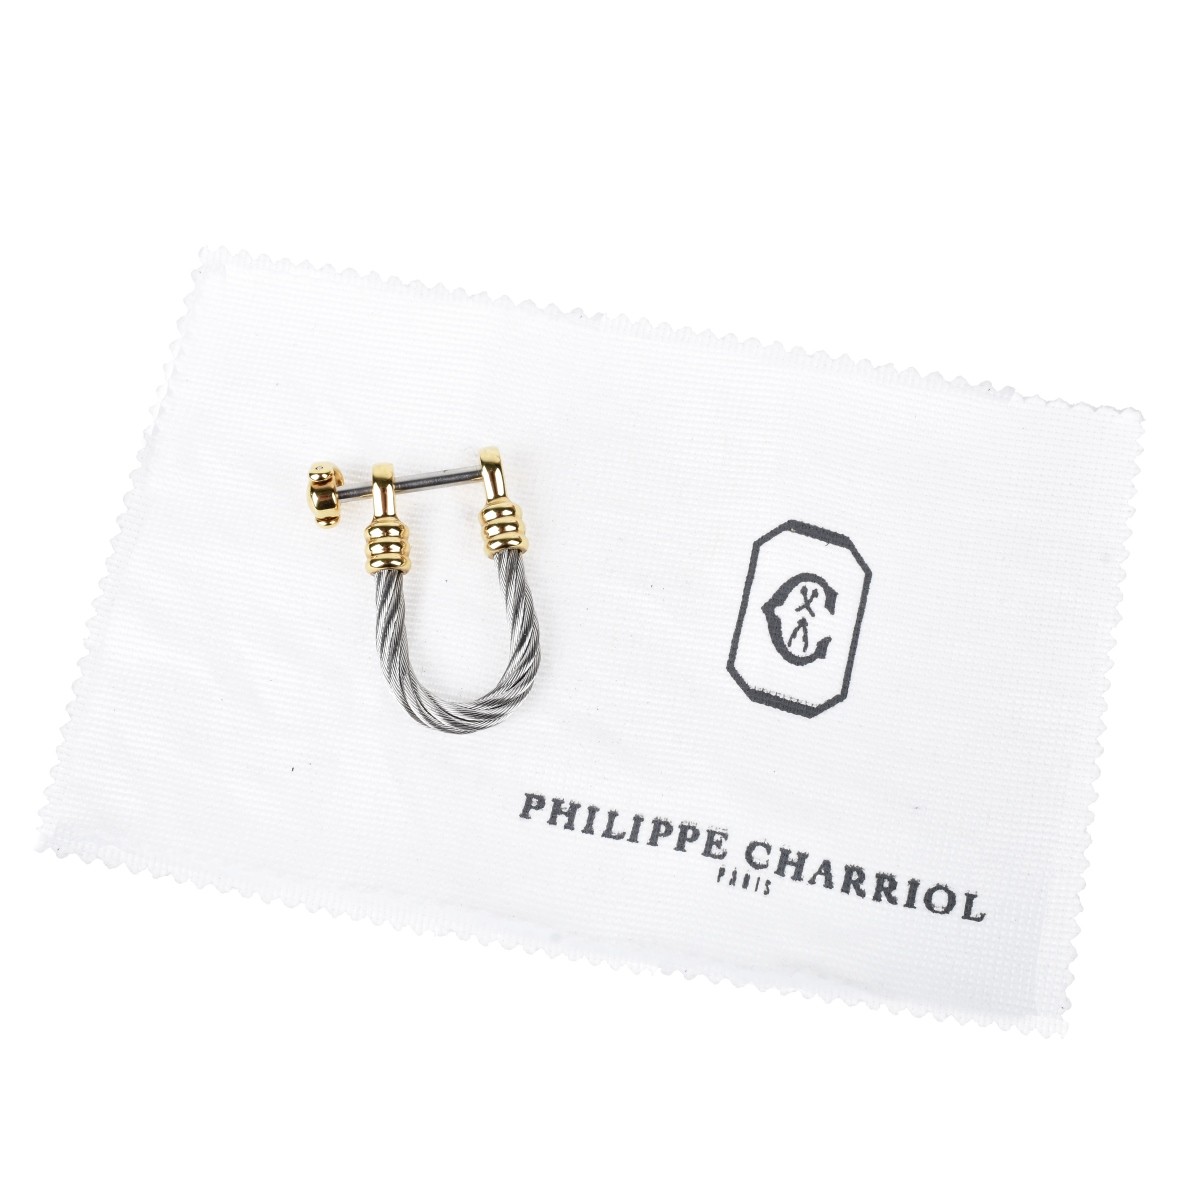 Philippe Charriol 18K and Steel Key Ring